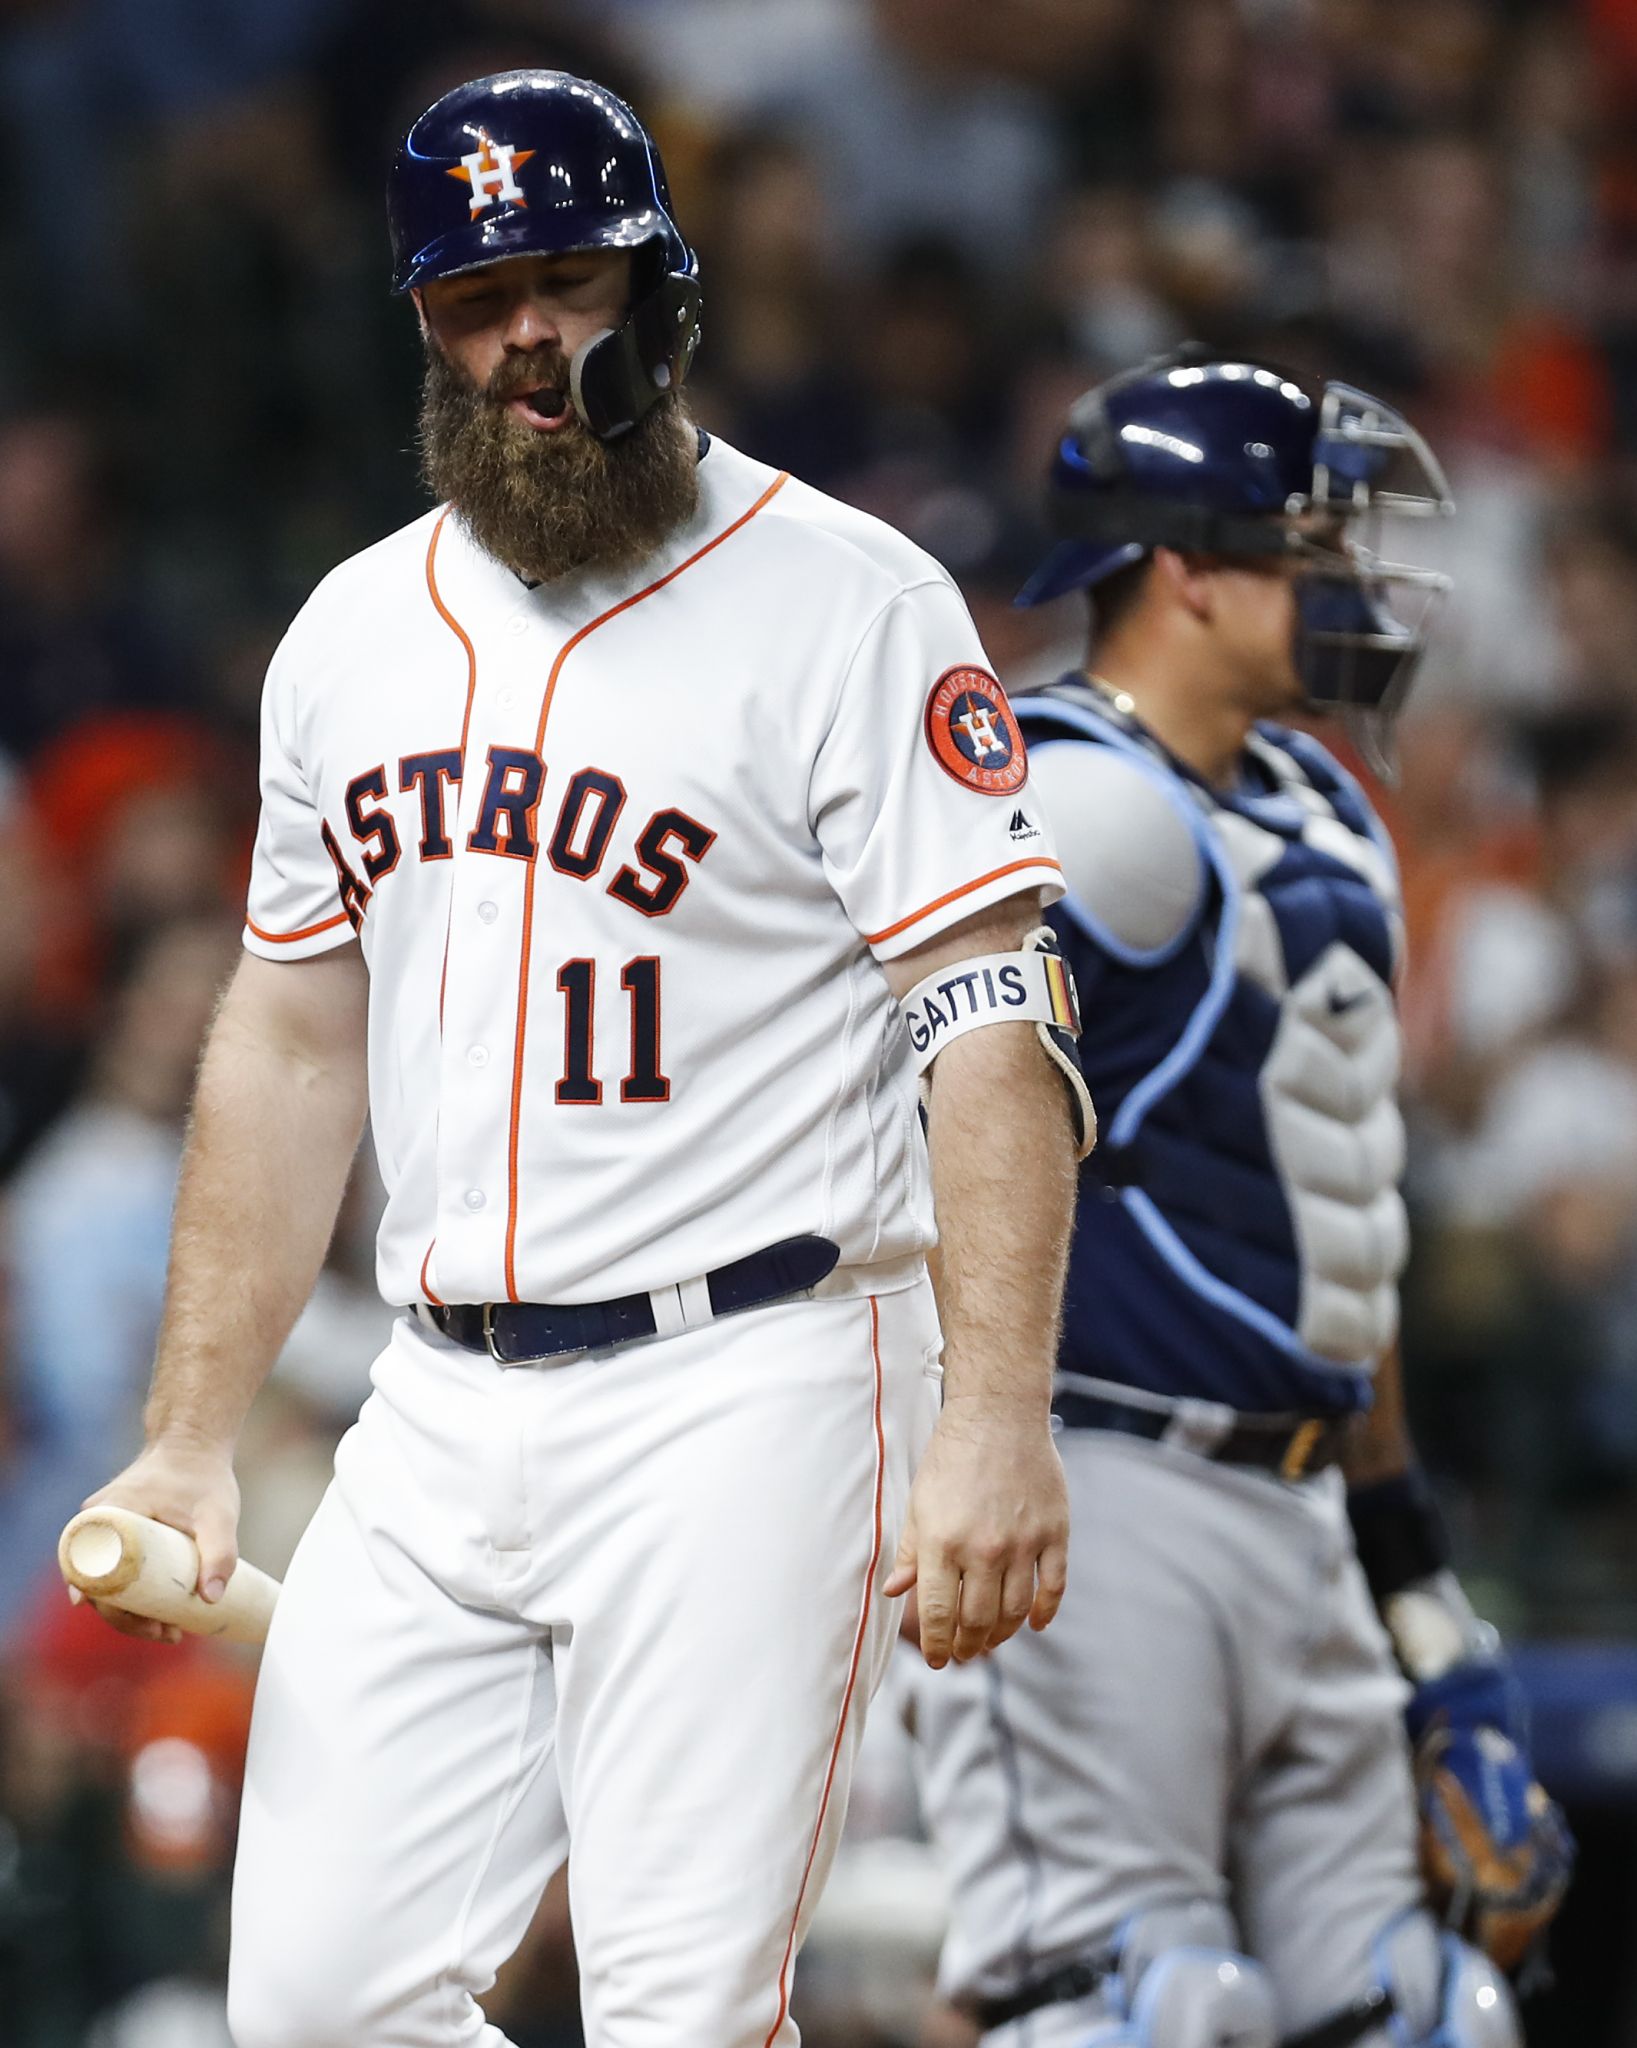 Houston Astros: Why Evan Gattis is the answer at DH